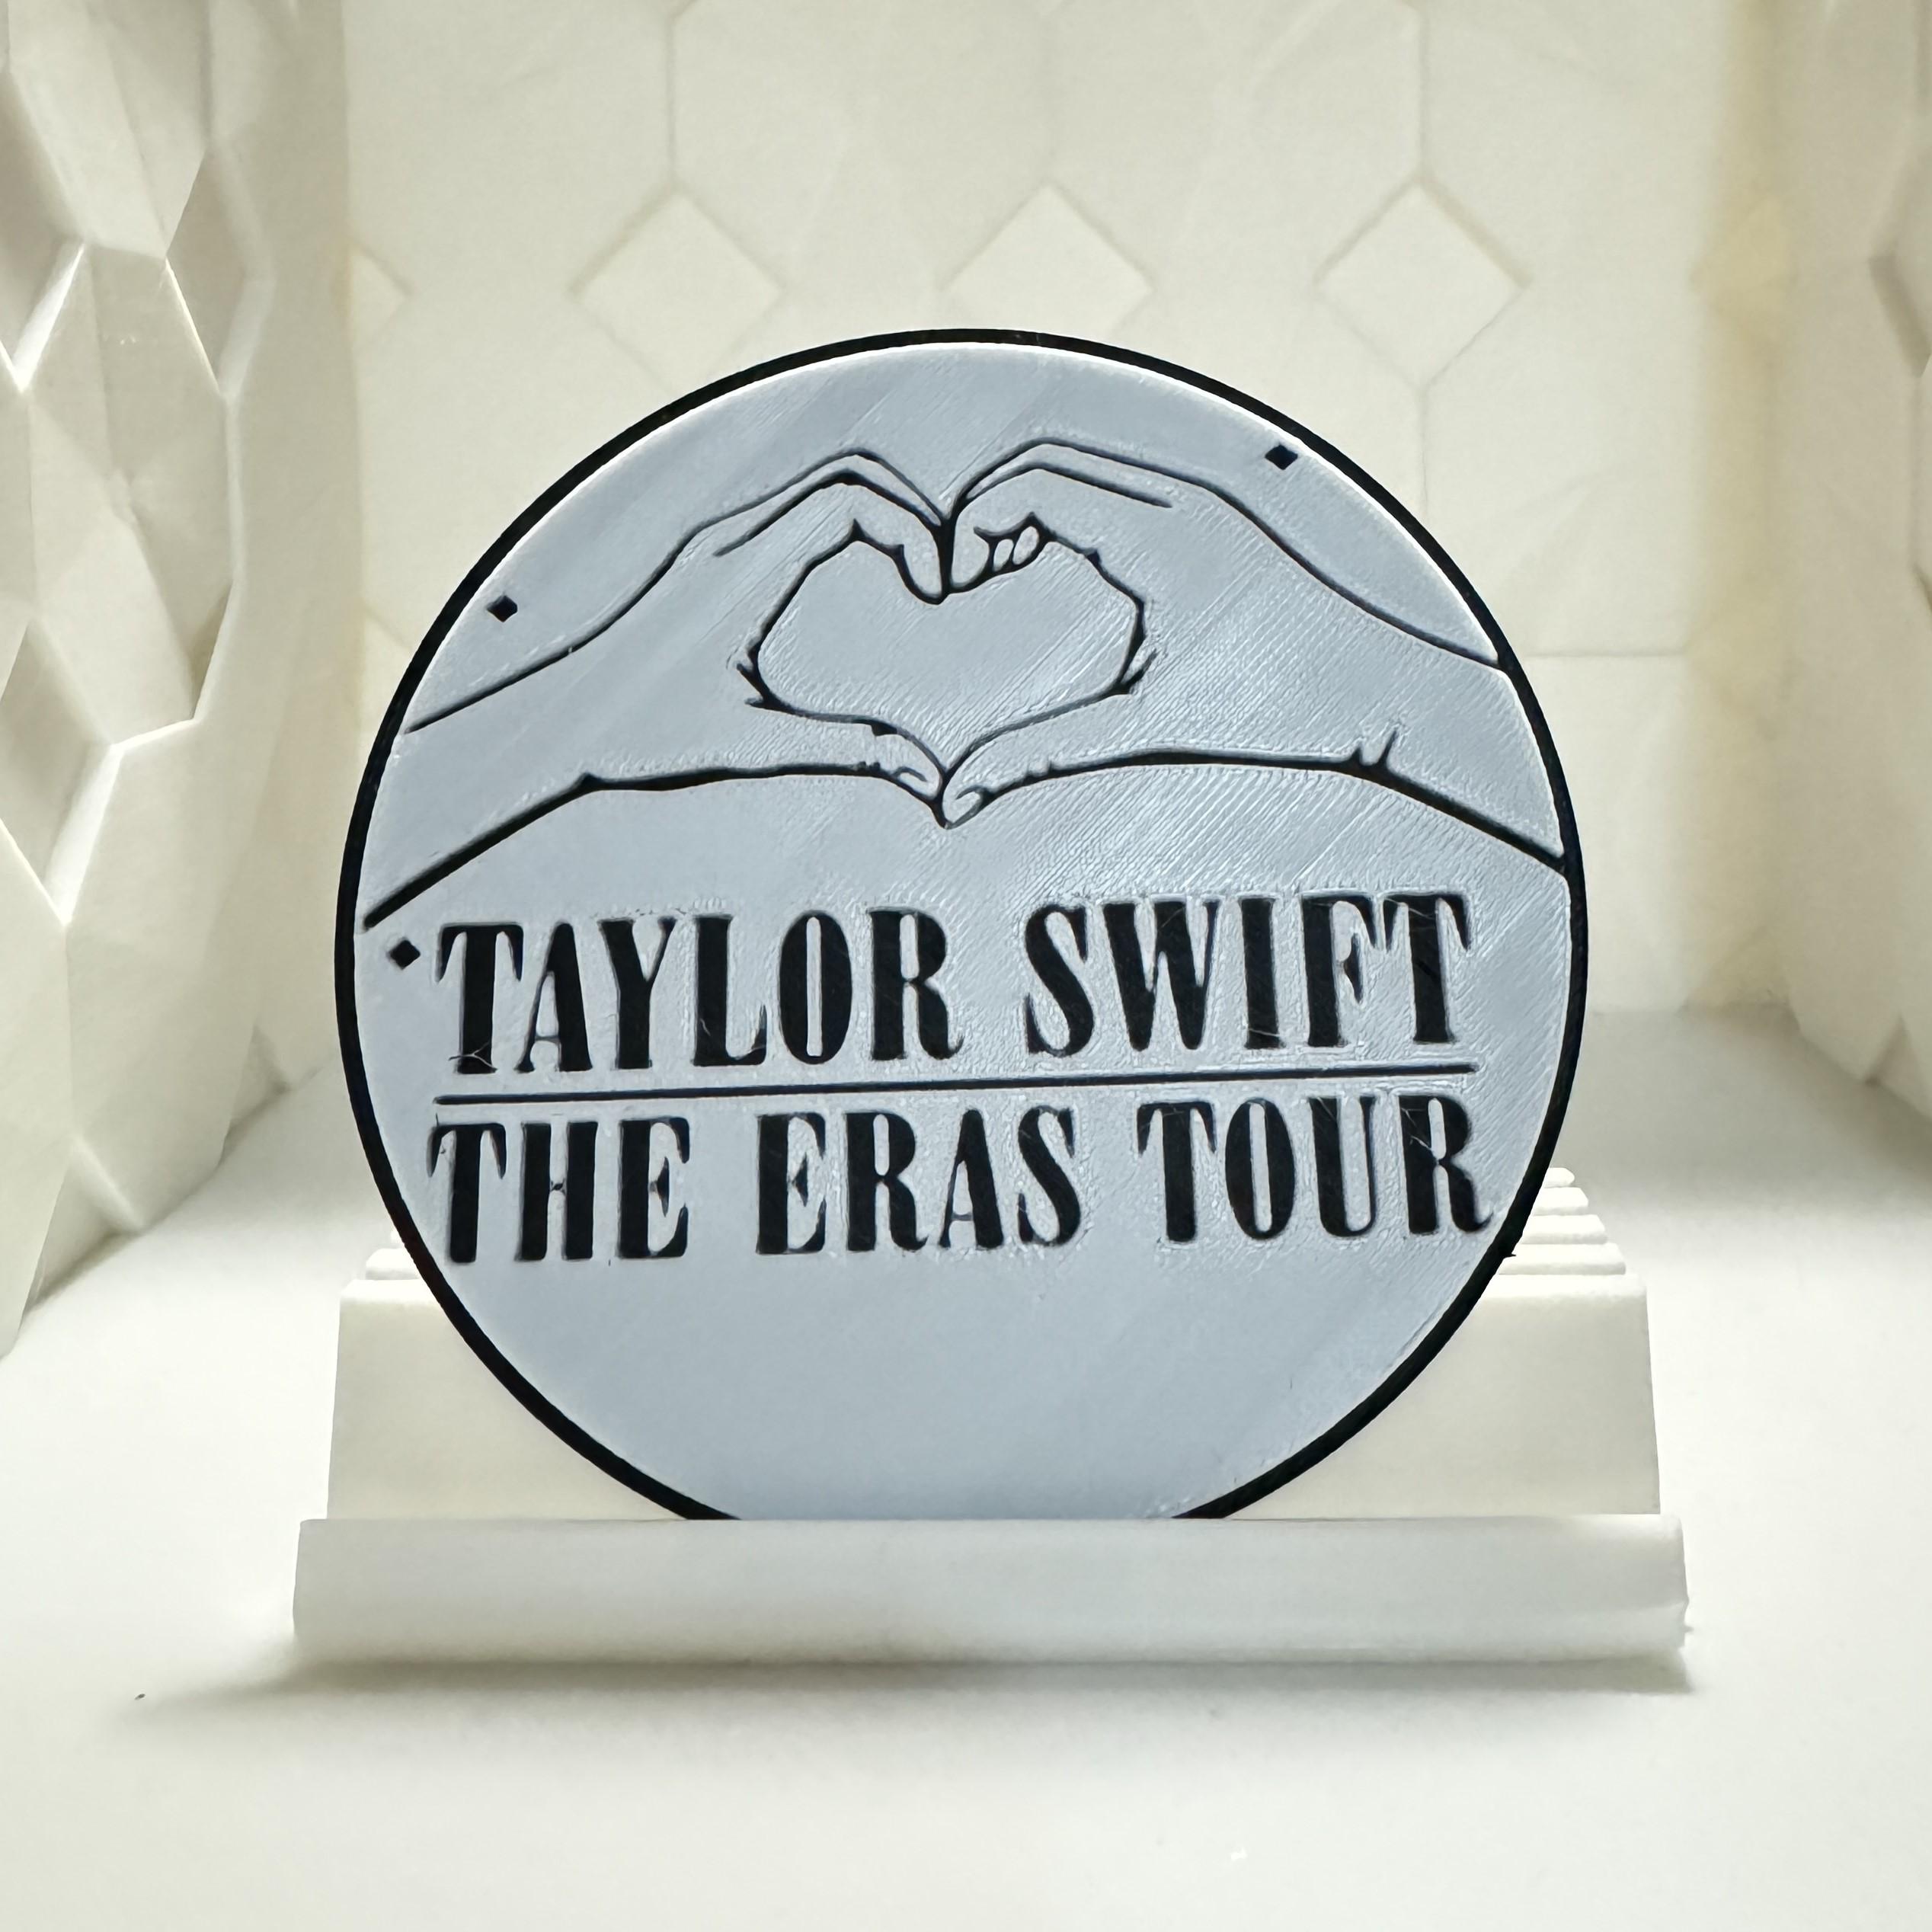 Taylor Swift Themed Coasters - Set of 4  3d model